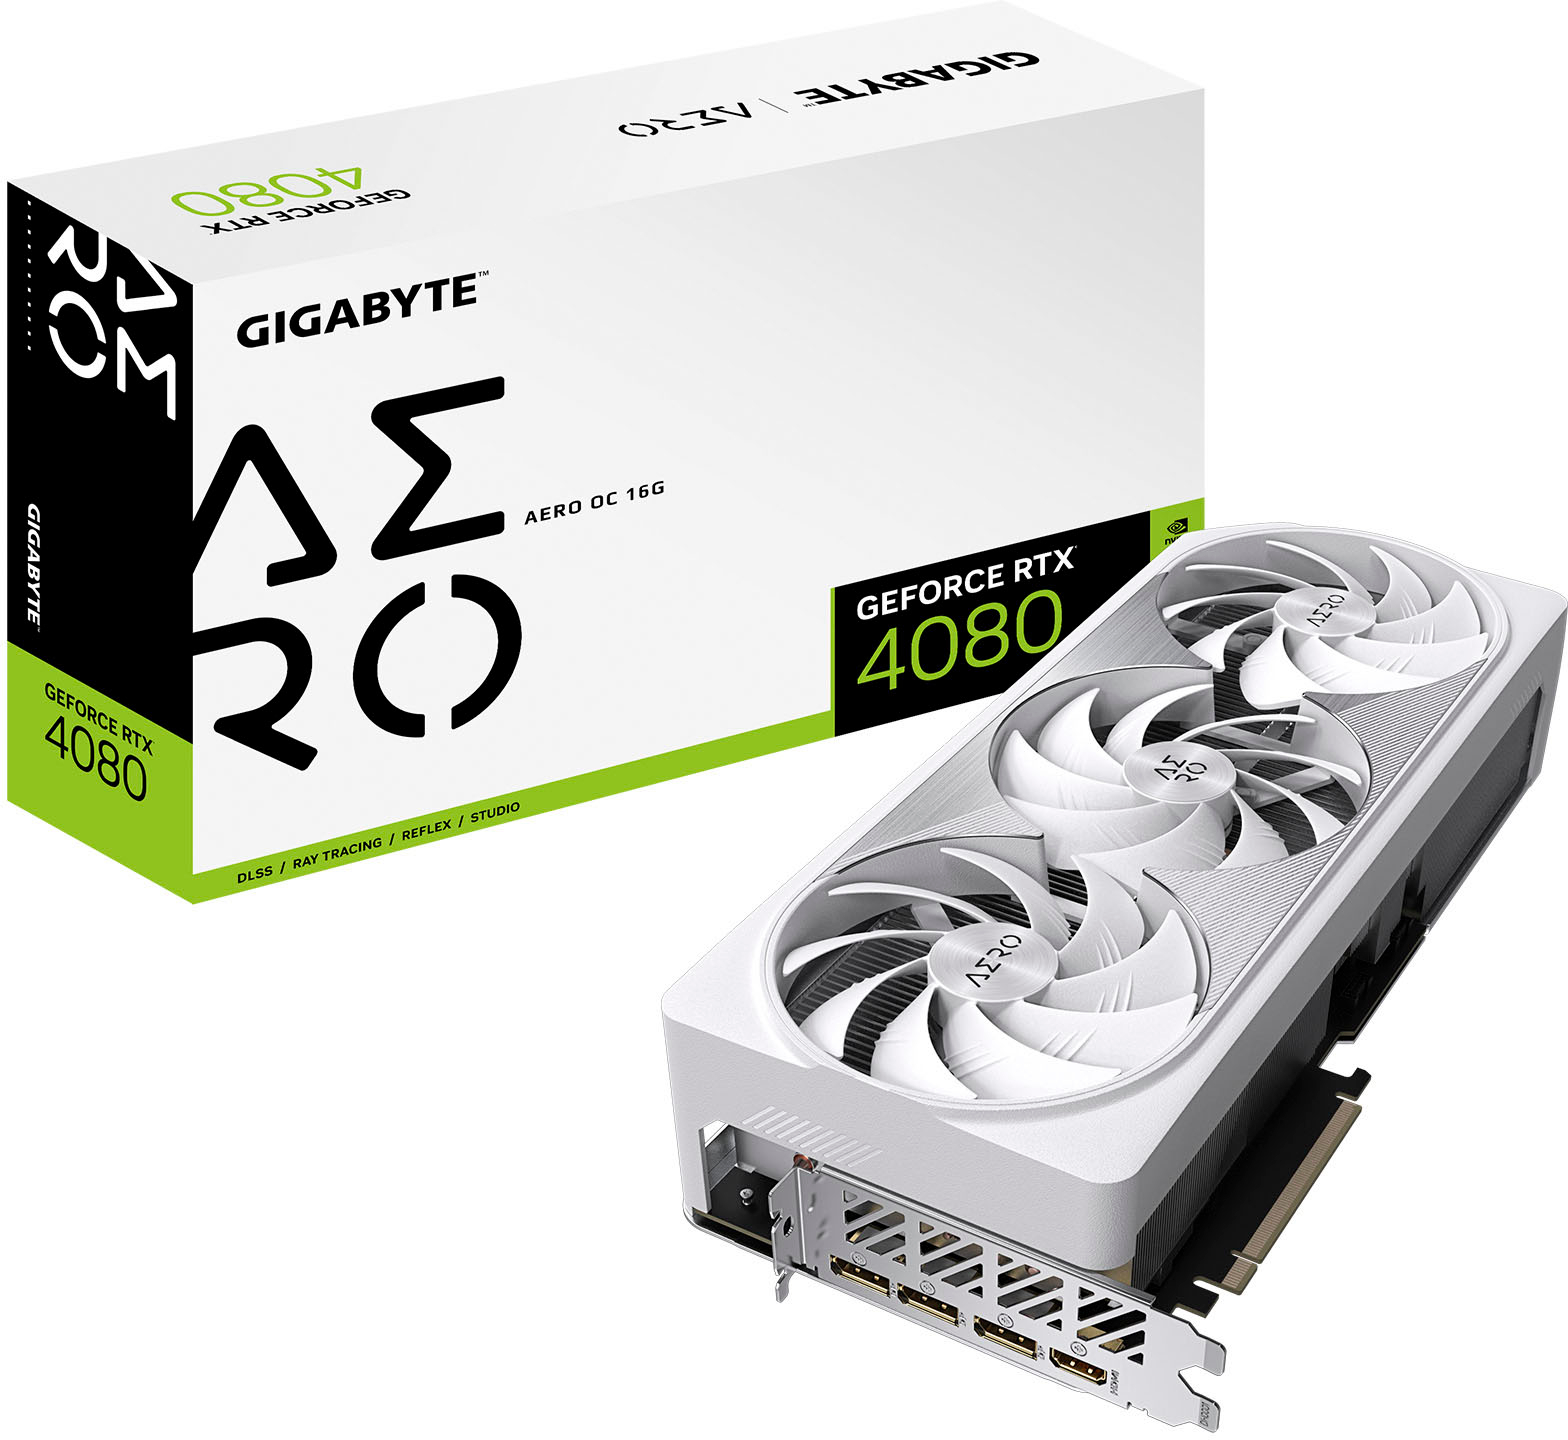 What PSU is best for RTX 4080?